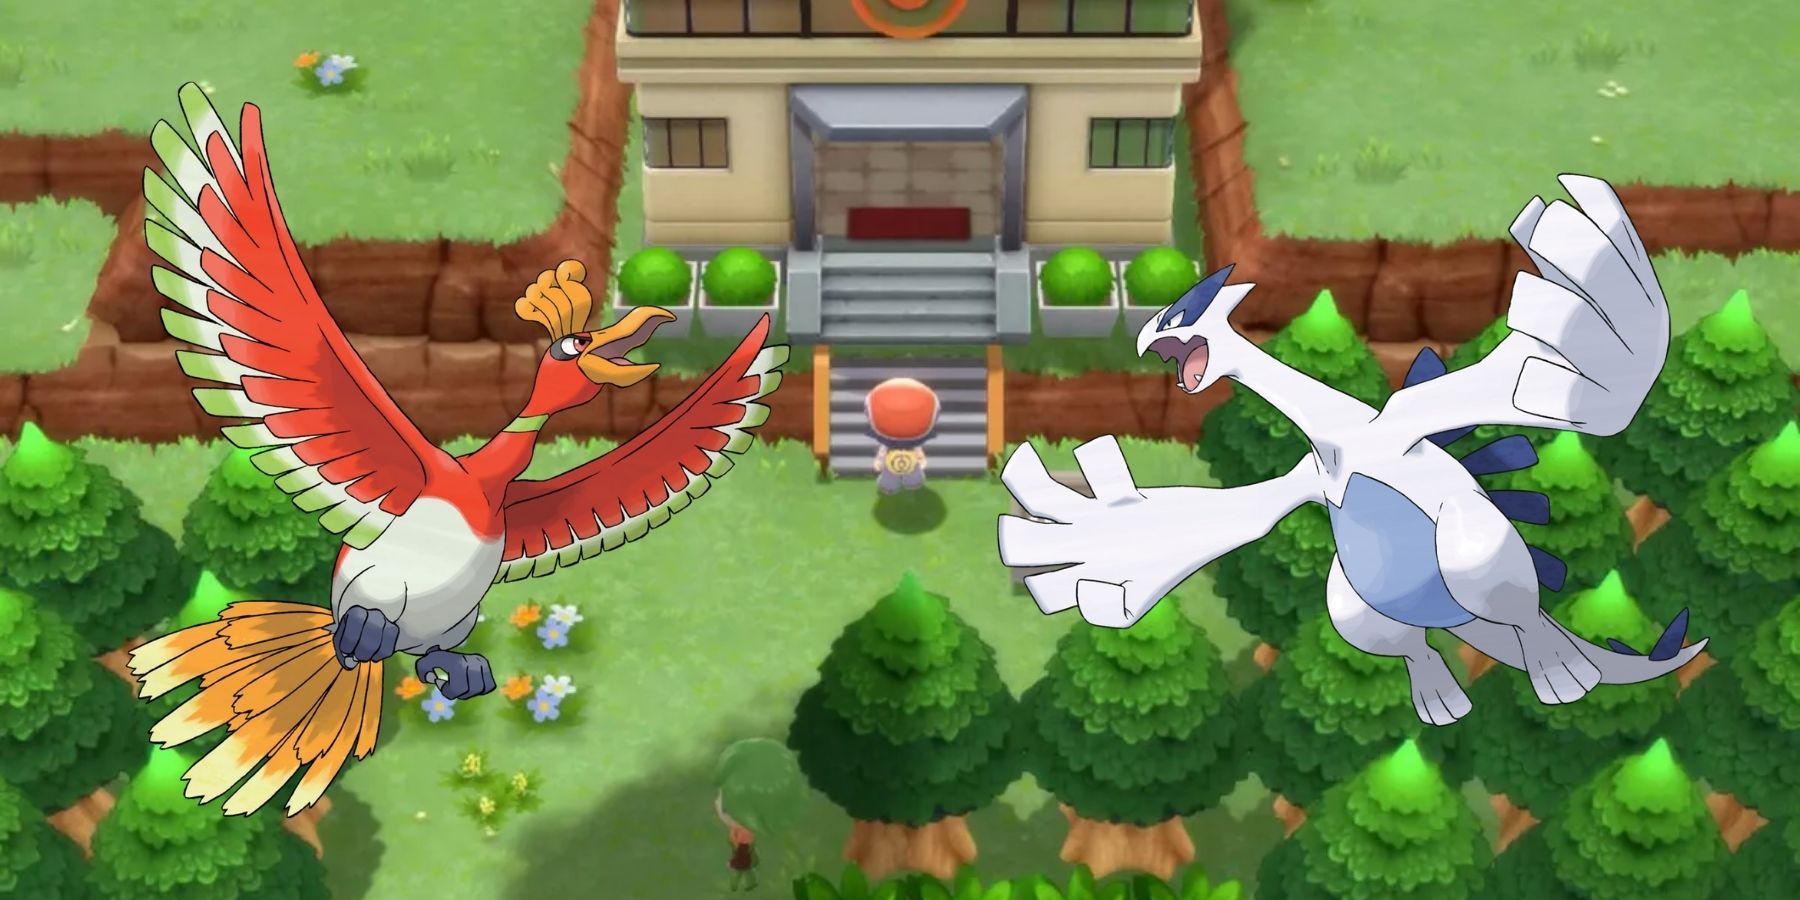 Pokemon Brilliant Diamond and Shining Pearl's Exclusive Legendaries are a  Great Homage